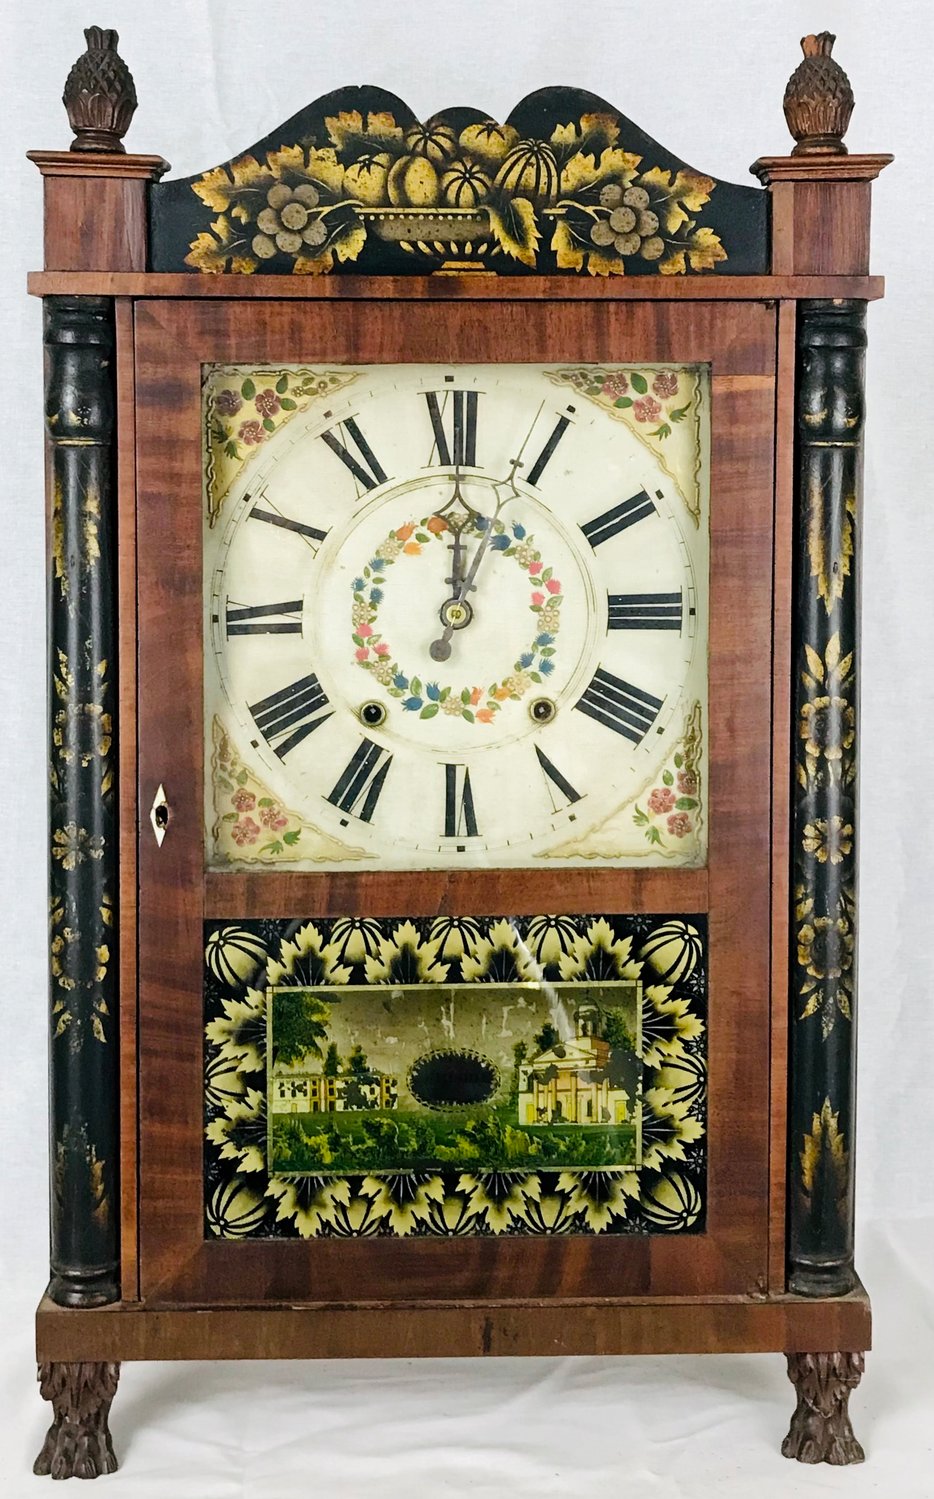 HAND CRAFTED — Clocks made in Madison County in the mid 1800s will be on display at the Madison County Historical Society from Nov. 1 to Dec. 19. The owner of the collection, Russell Oechsle, will be offering guided tours on Nov. 21 and 28 at 1 p.m. and Dec. 12 and 19 at 1 p.m.